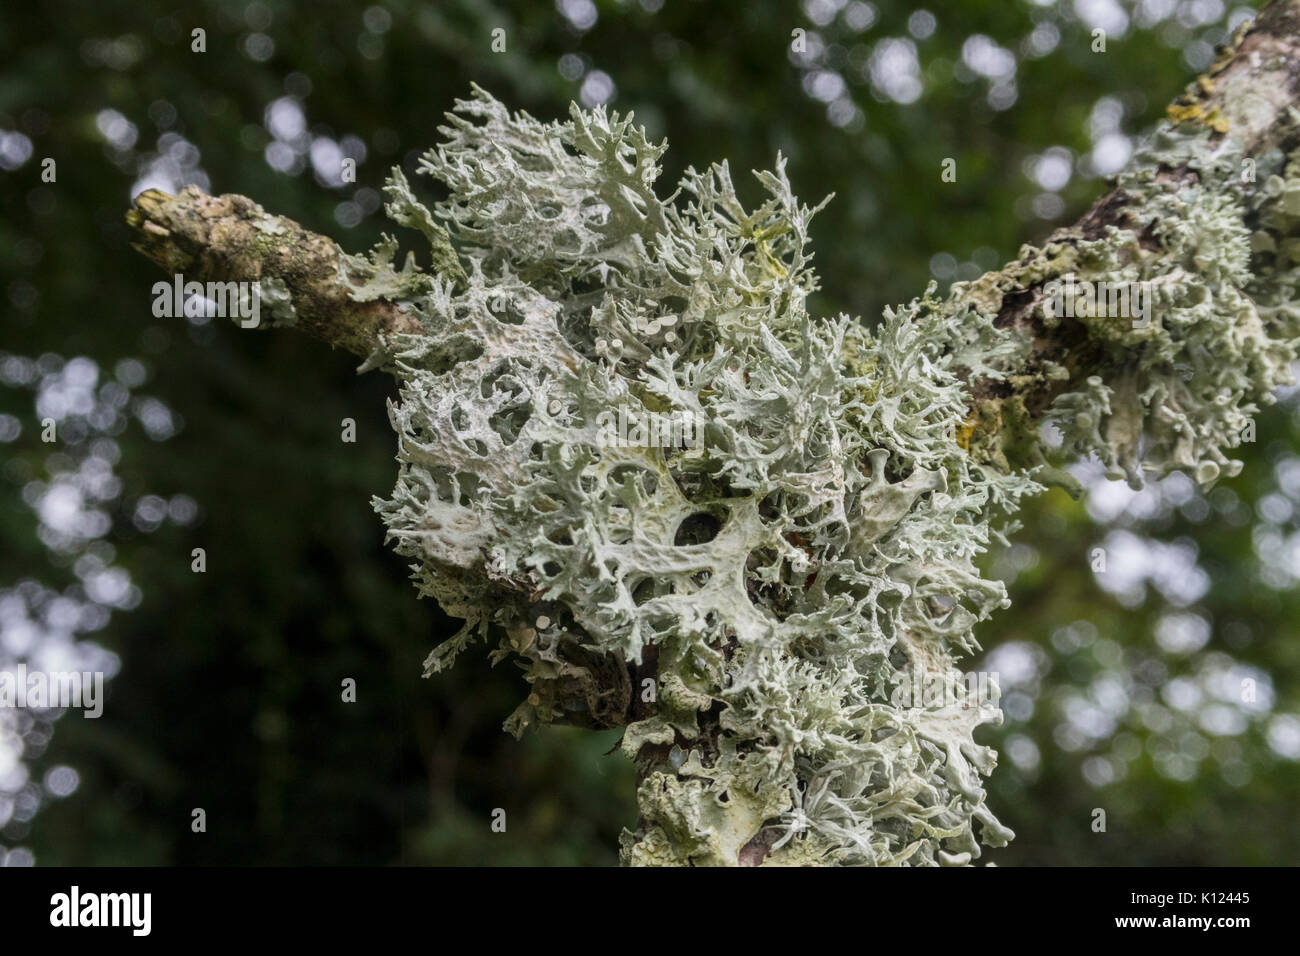 Reindeer lichen Cladonia rangiferina growing on a branch of an old oak tree. Stock Photo